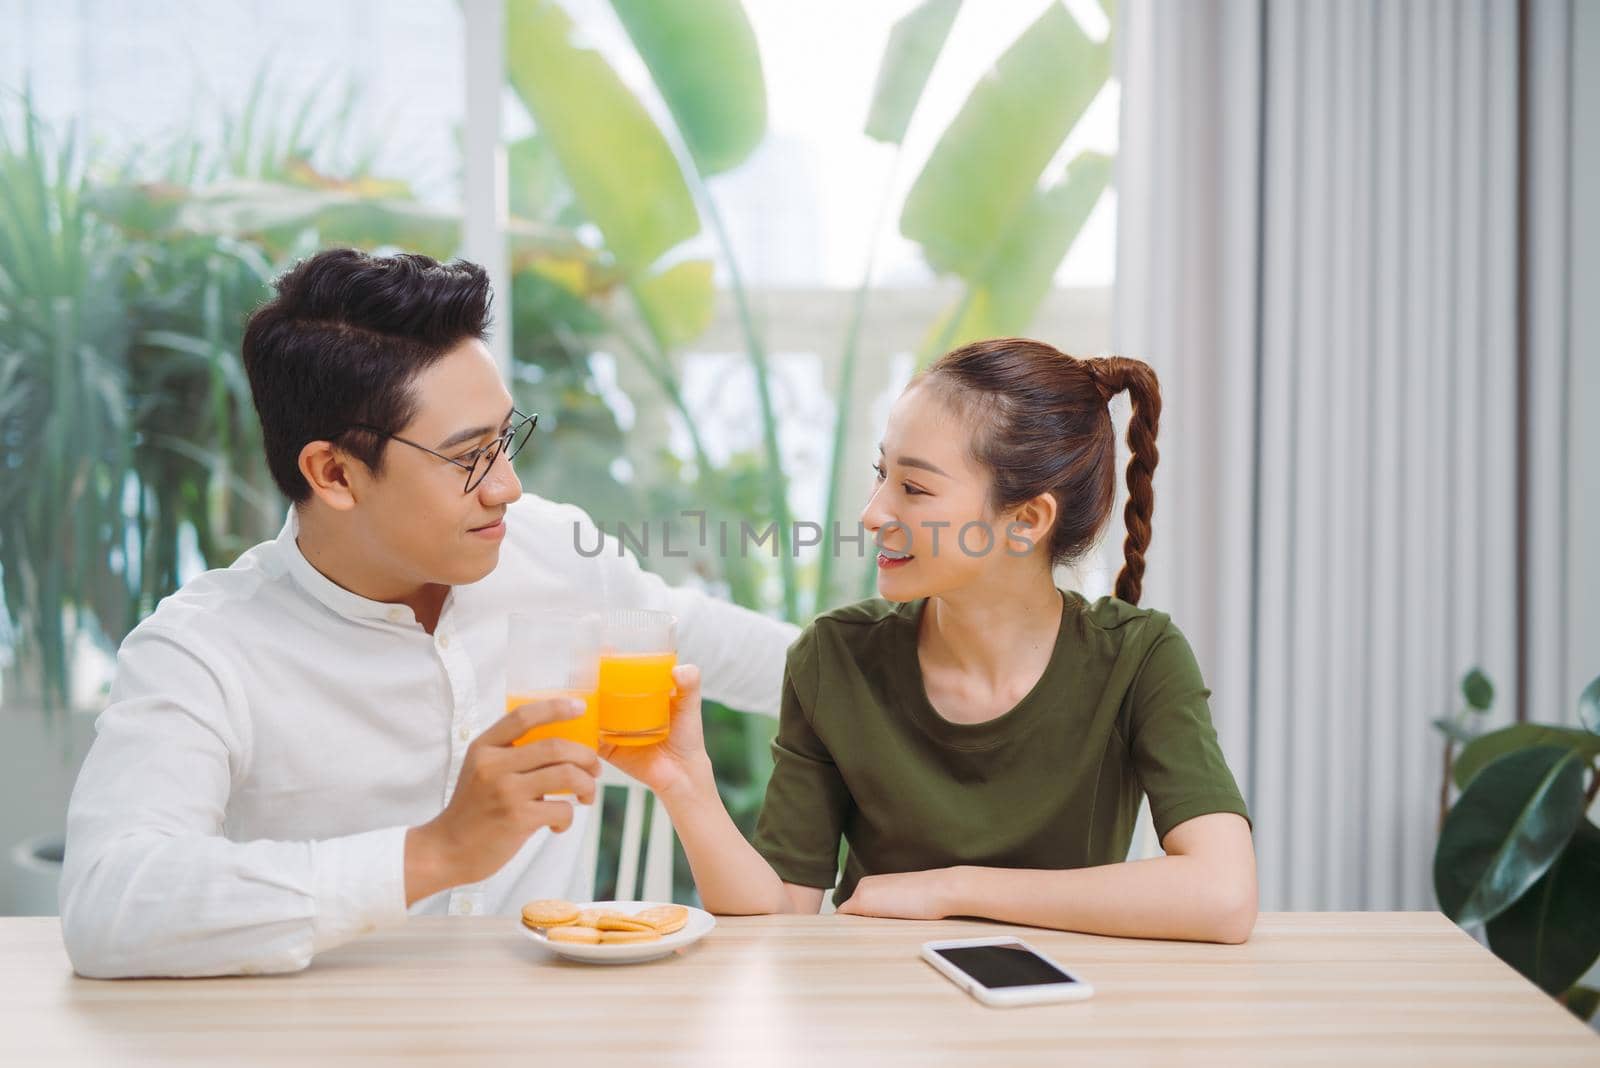 Loving man and woman drinking fresh orange juice enjoying pleasant morning cooking together, healthy meal and lifestyle concept